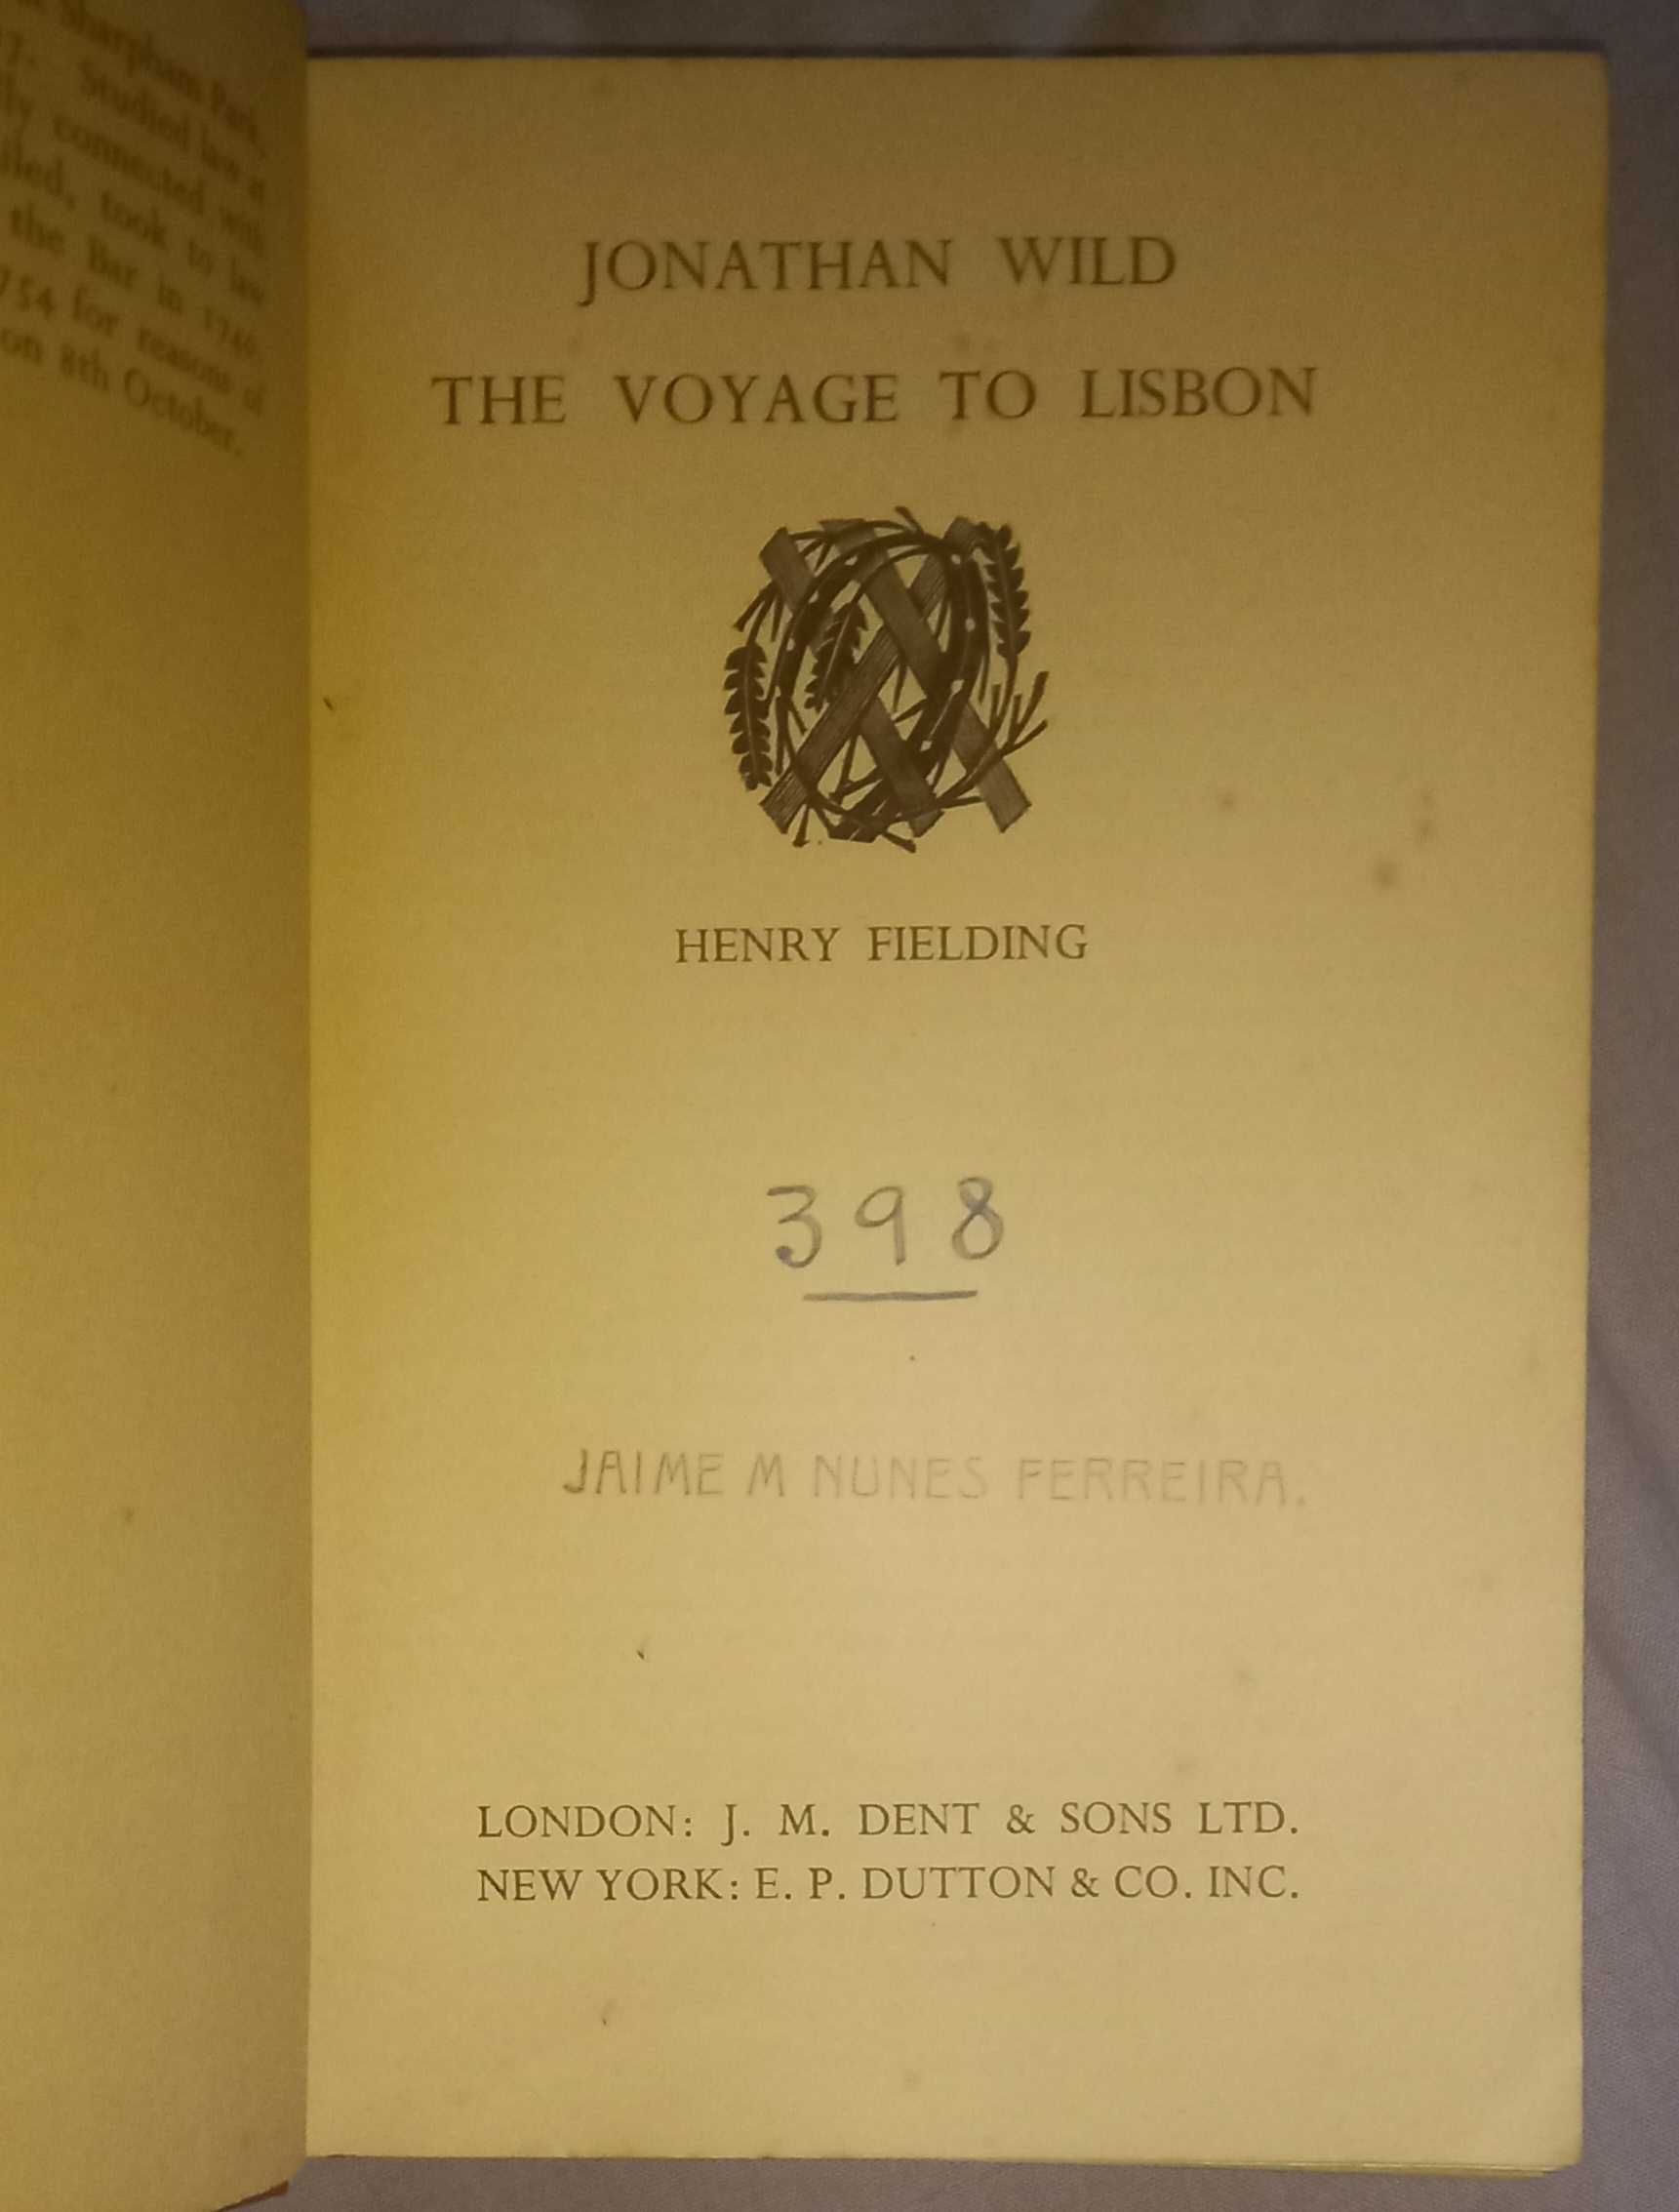 Jonathan Wild and The voyage to  Lisbon, Henry Fielding.